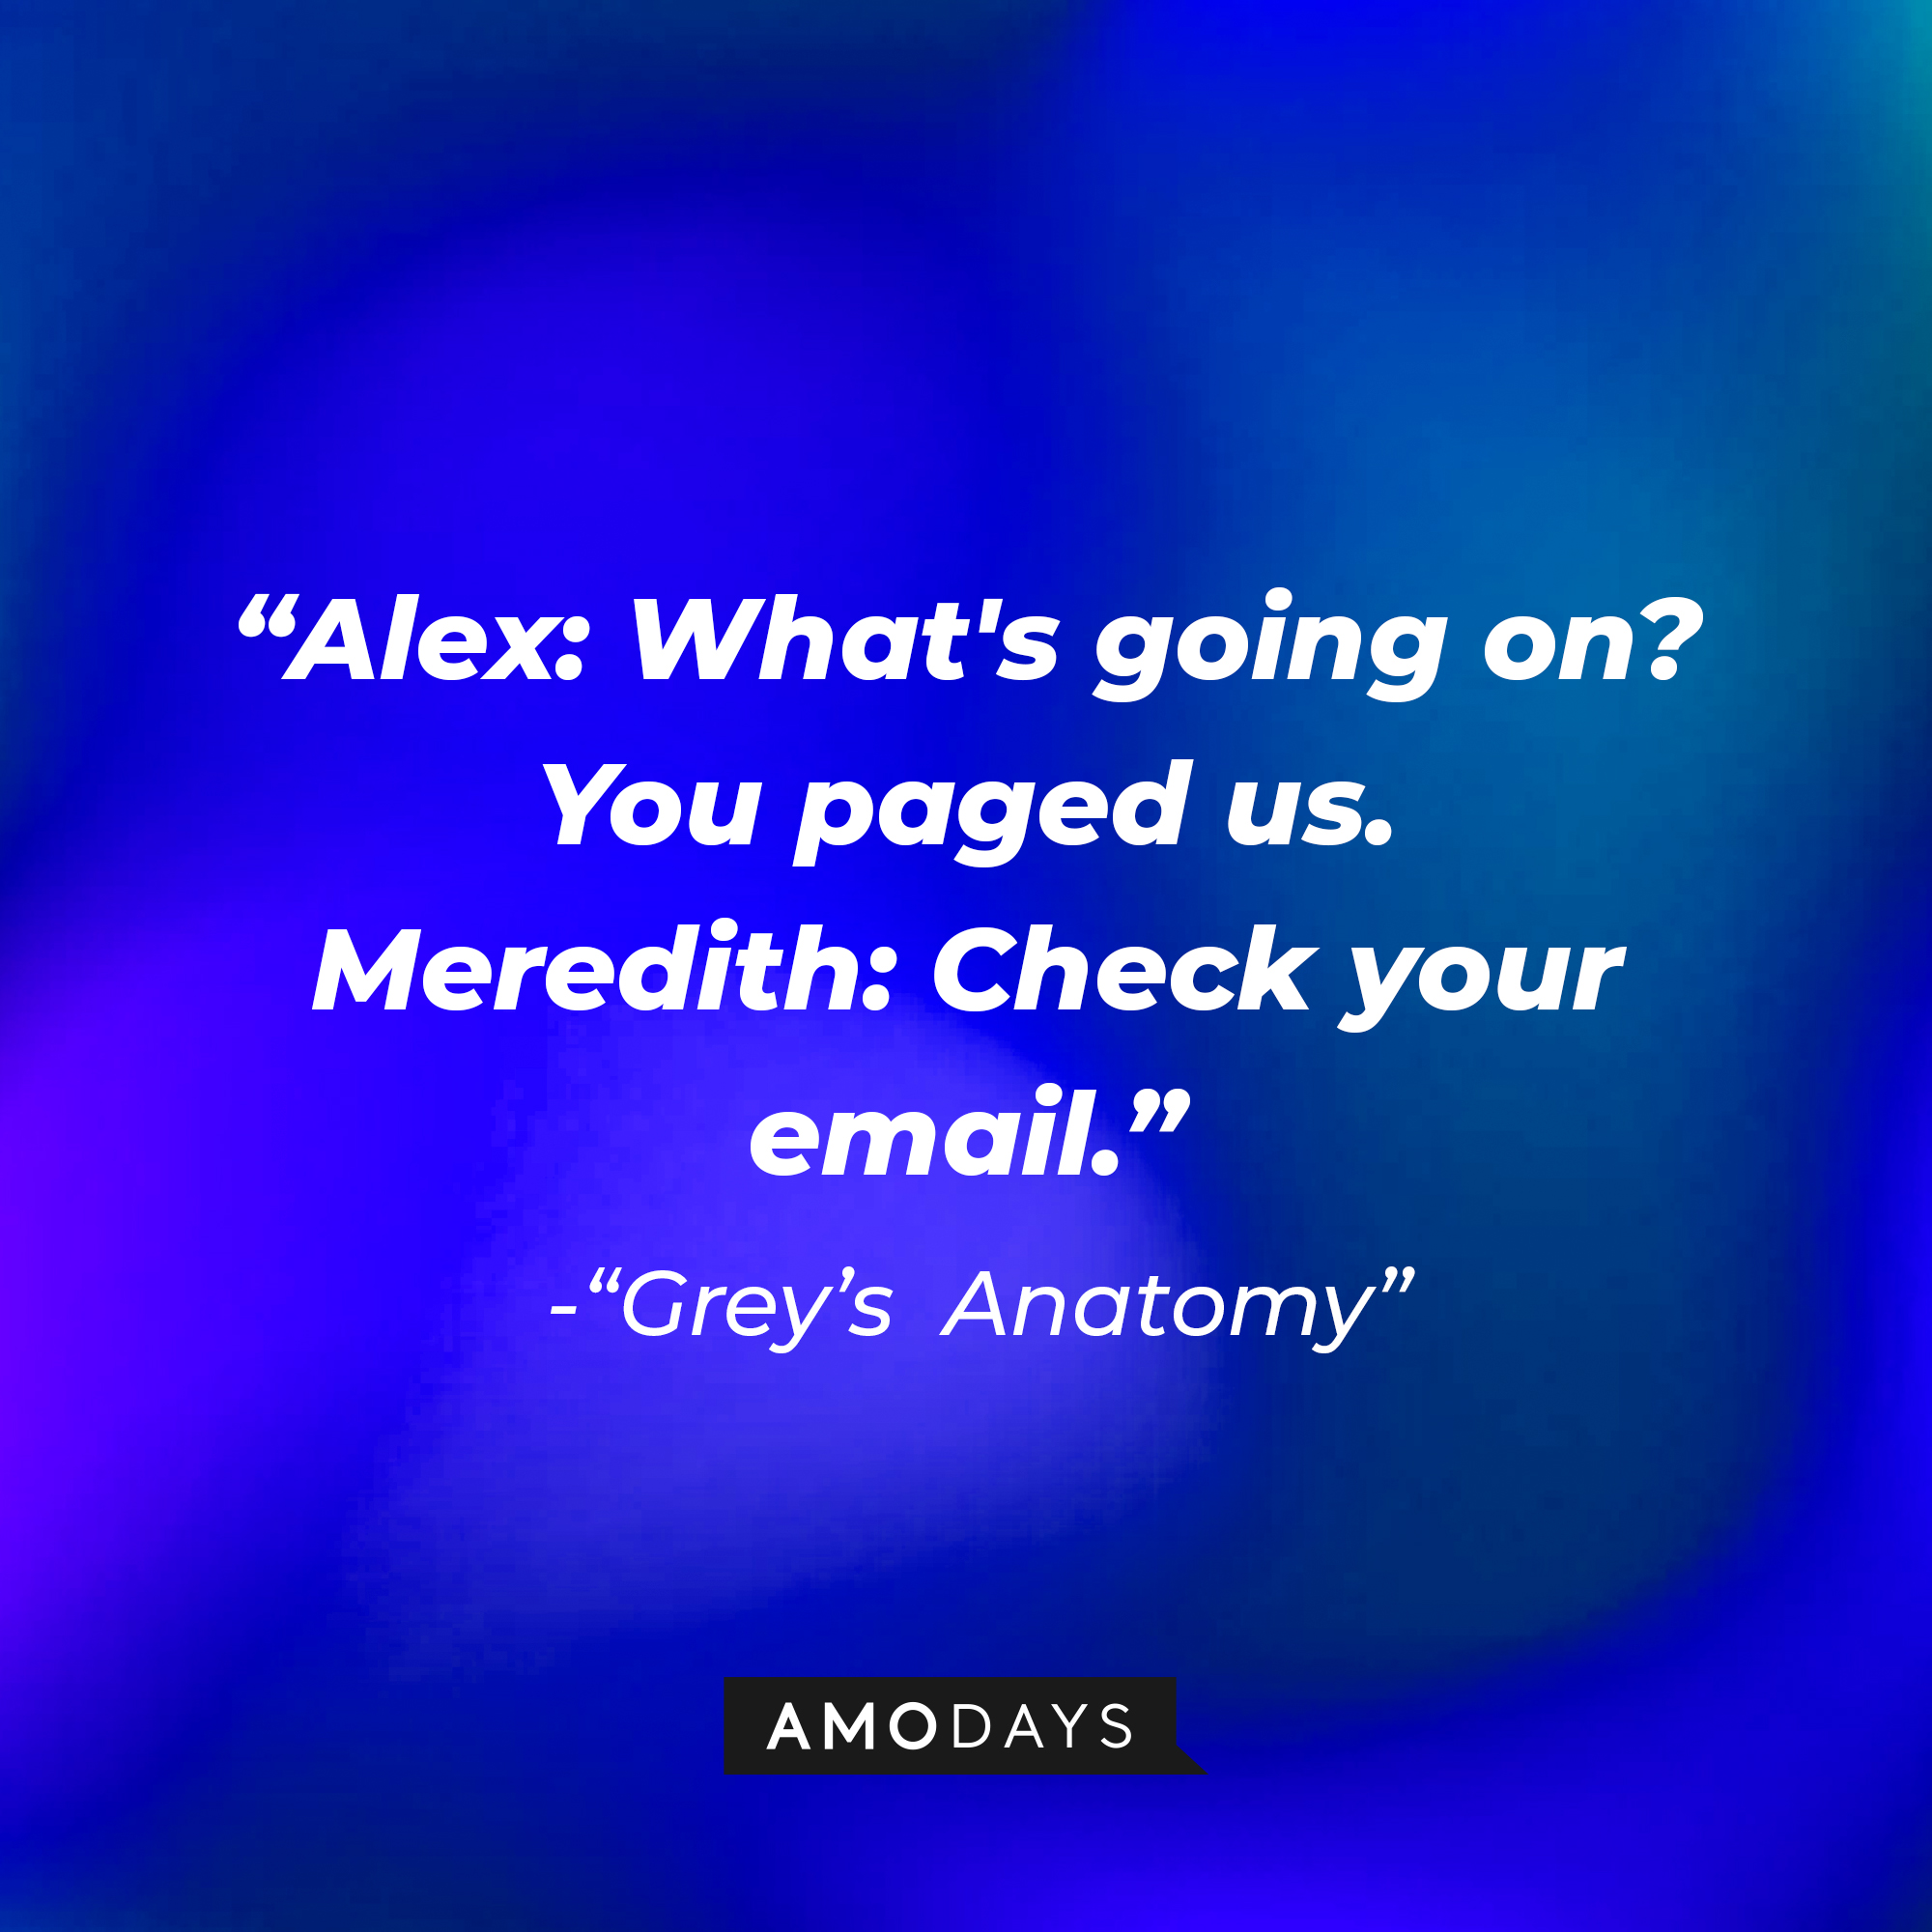 Alex's quote: What's going on? You paged us." Meredith: "Check your email." | Image: Amodays